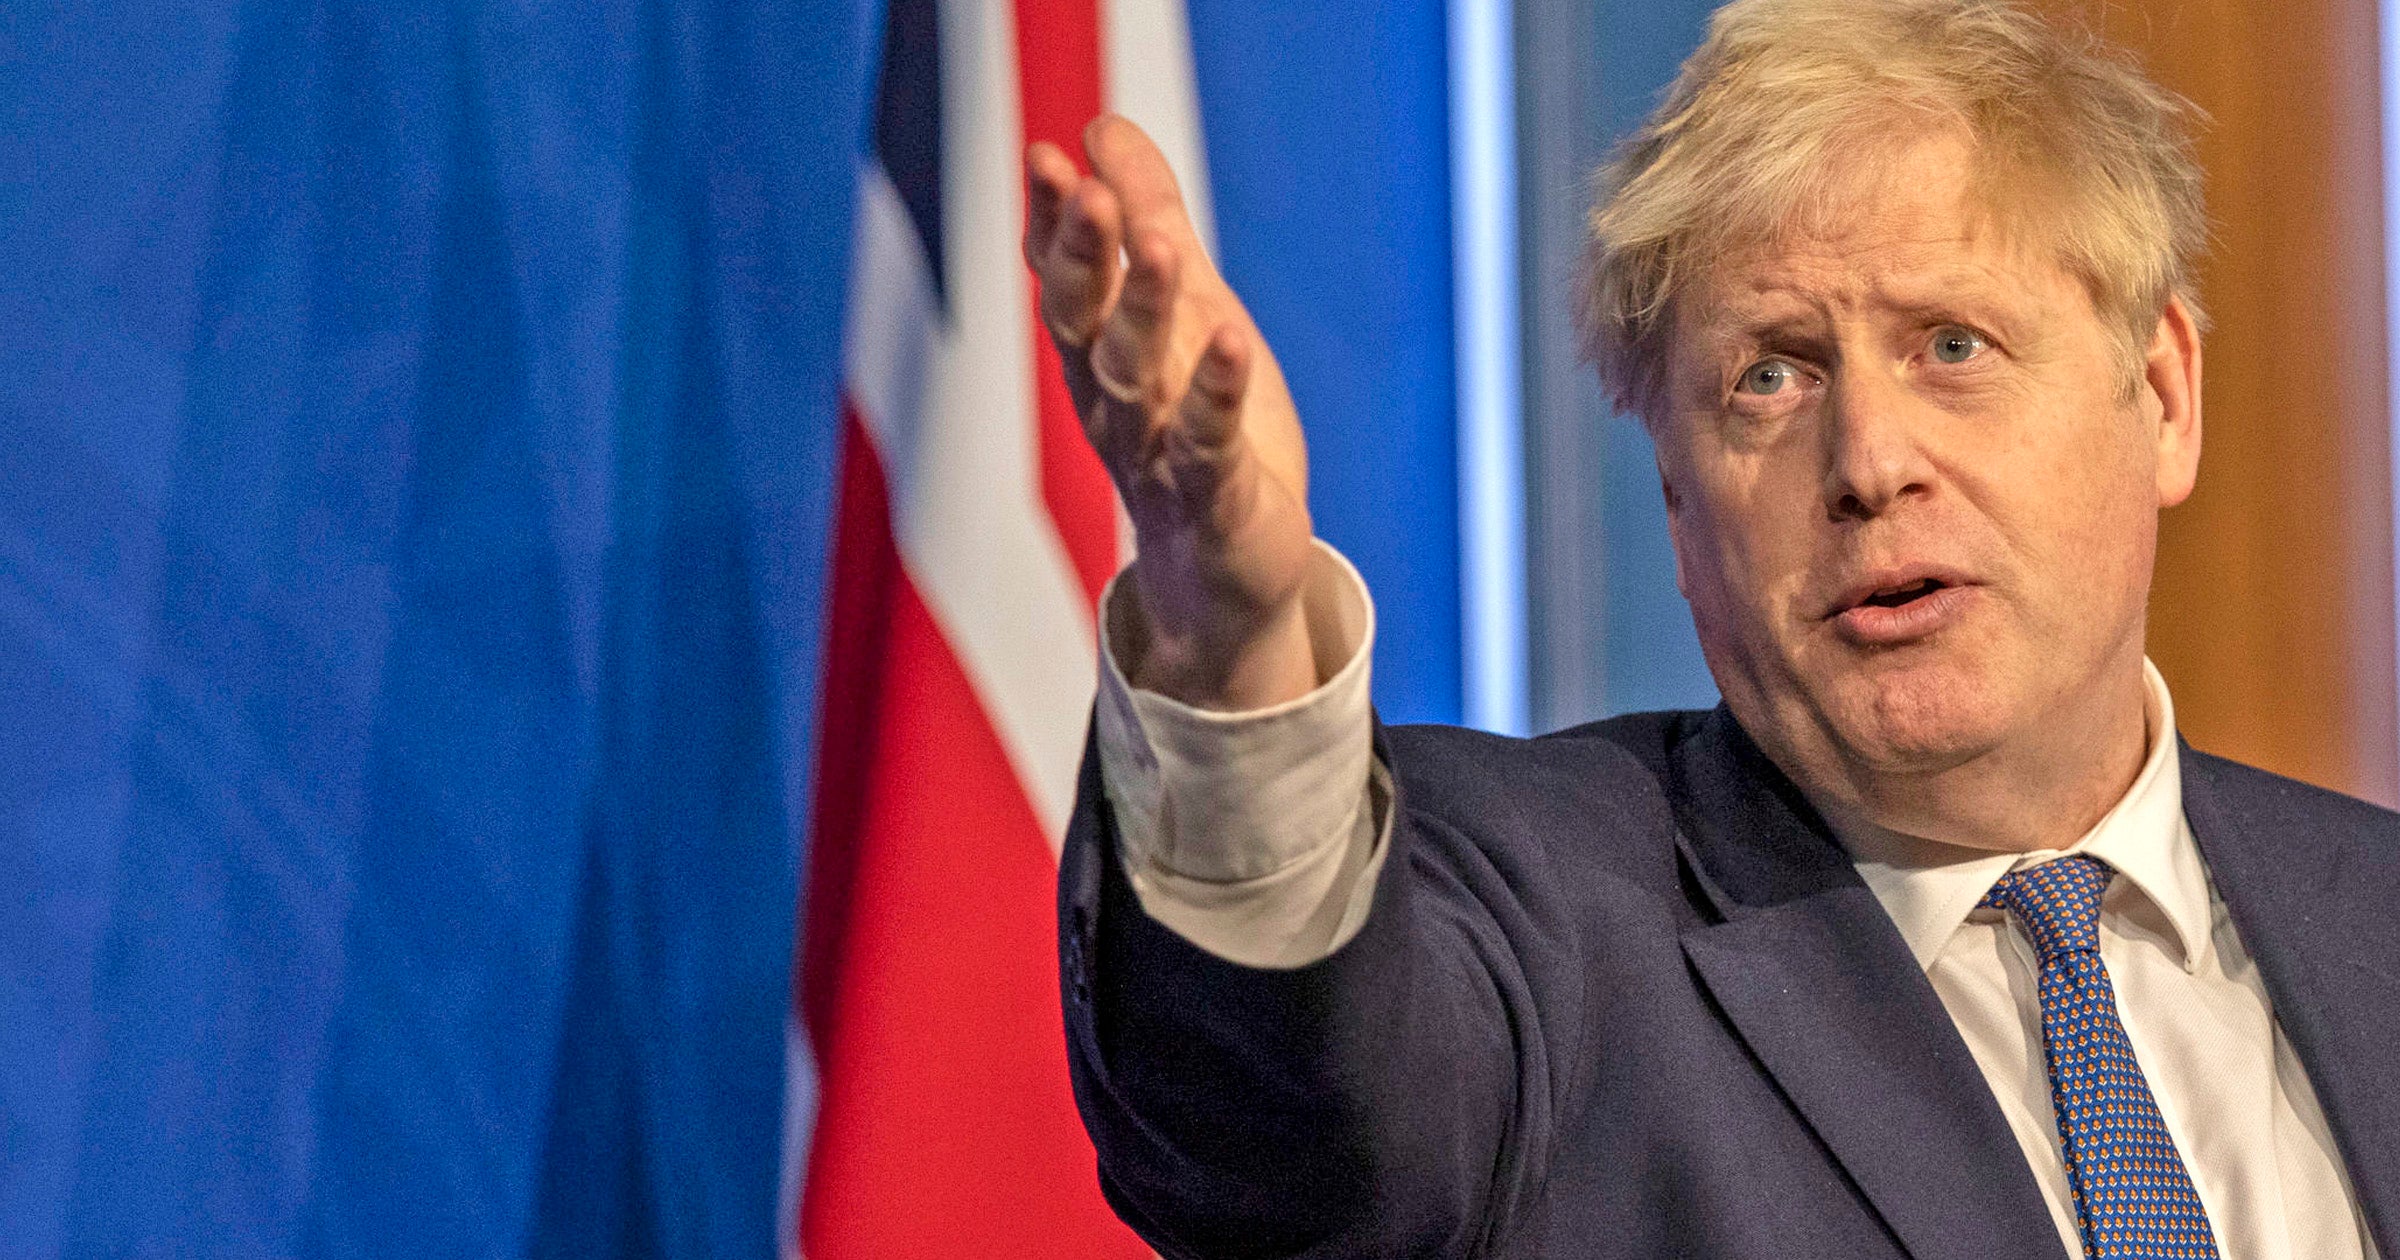 Boris Johnson is said to have attended a drinks party during lockdown